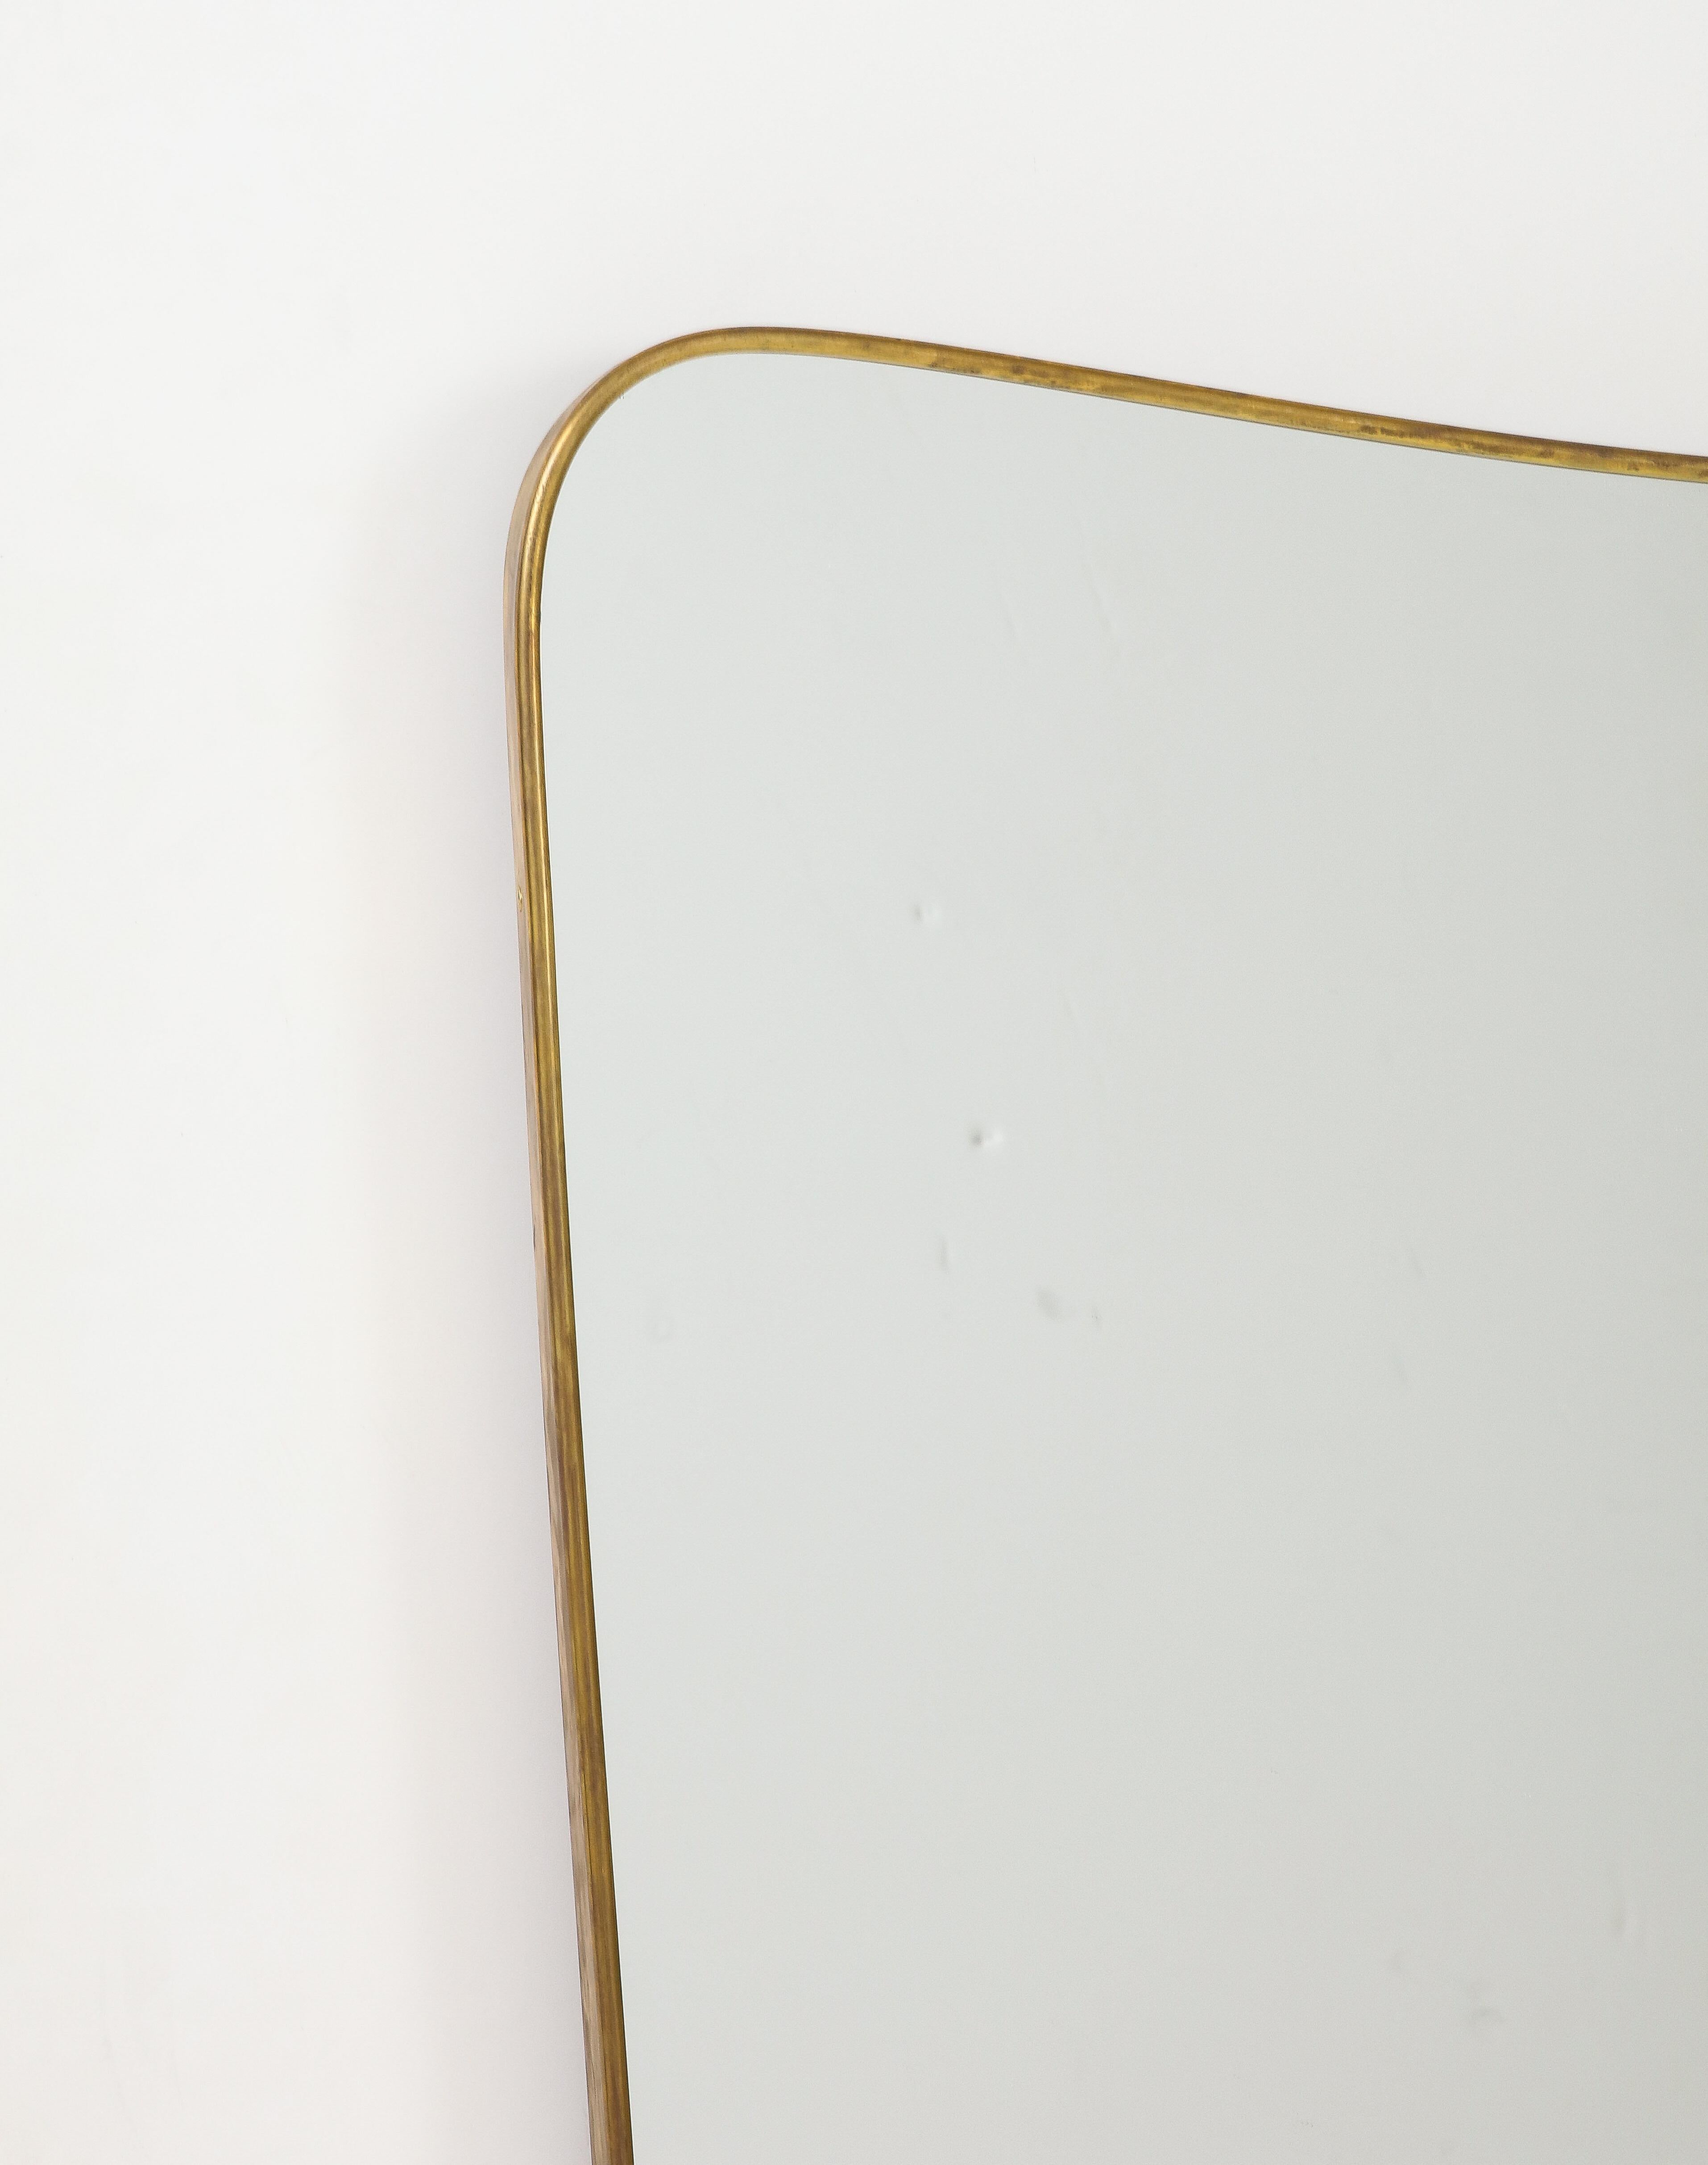 1950s Italian Modernist Grand Scale Shaped Brass Wall Mirror In Good Condition For Sale In New York, NY